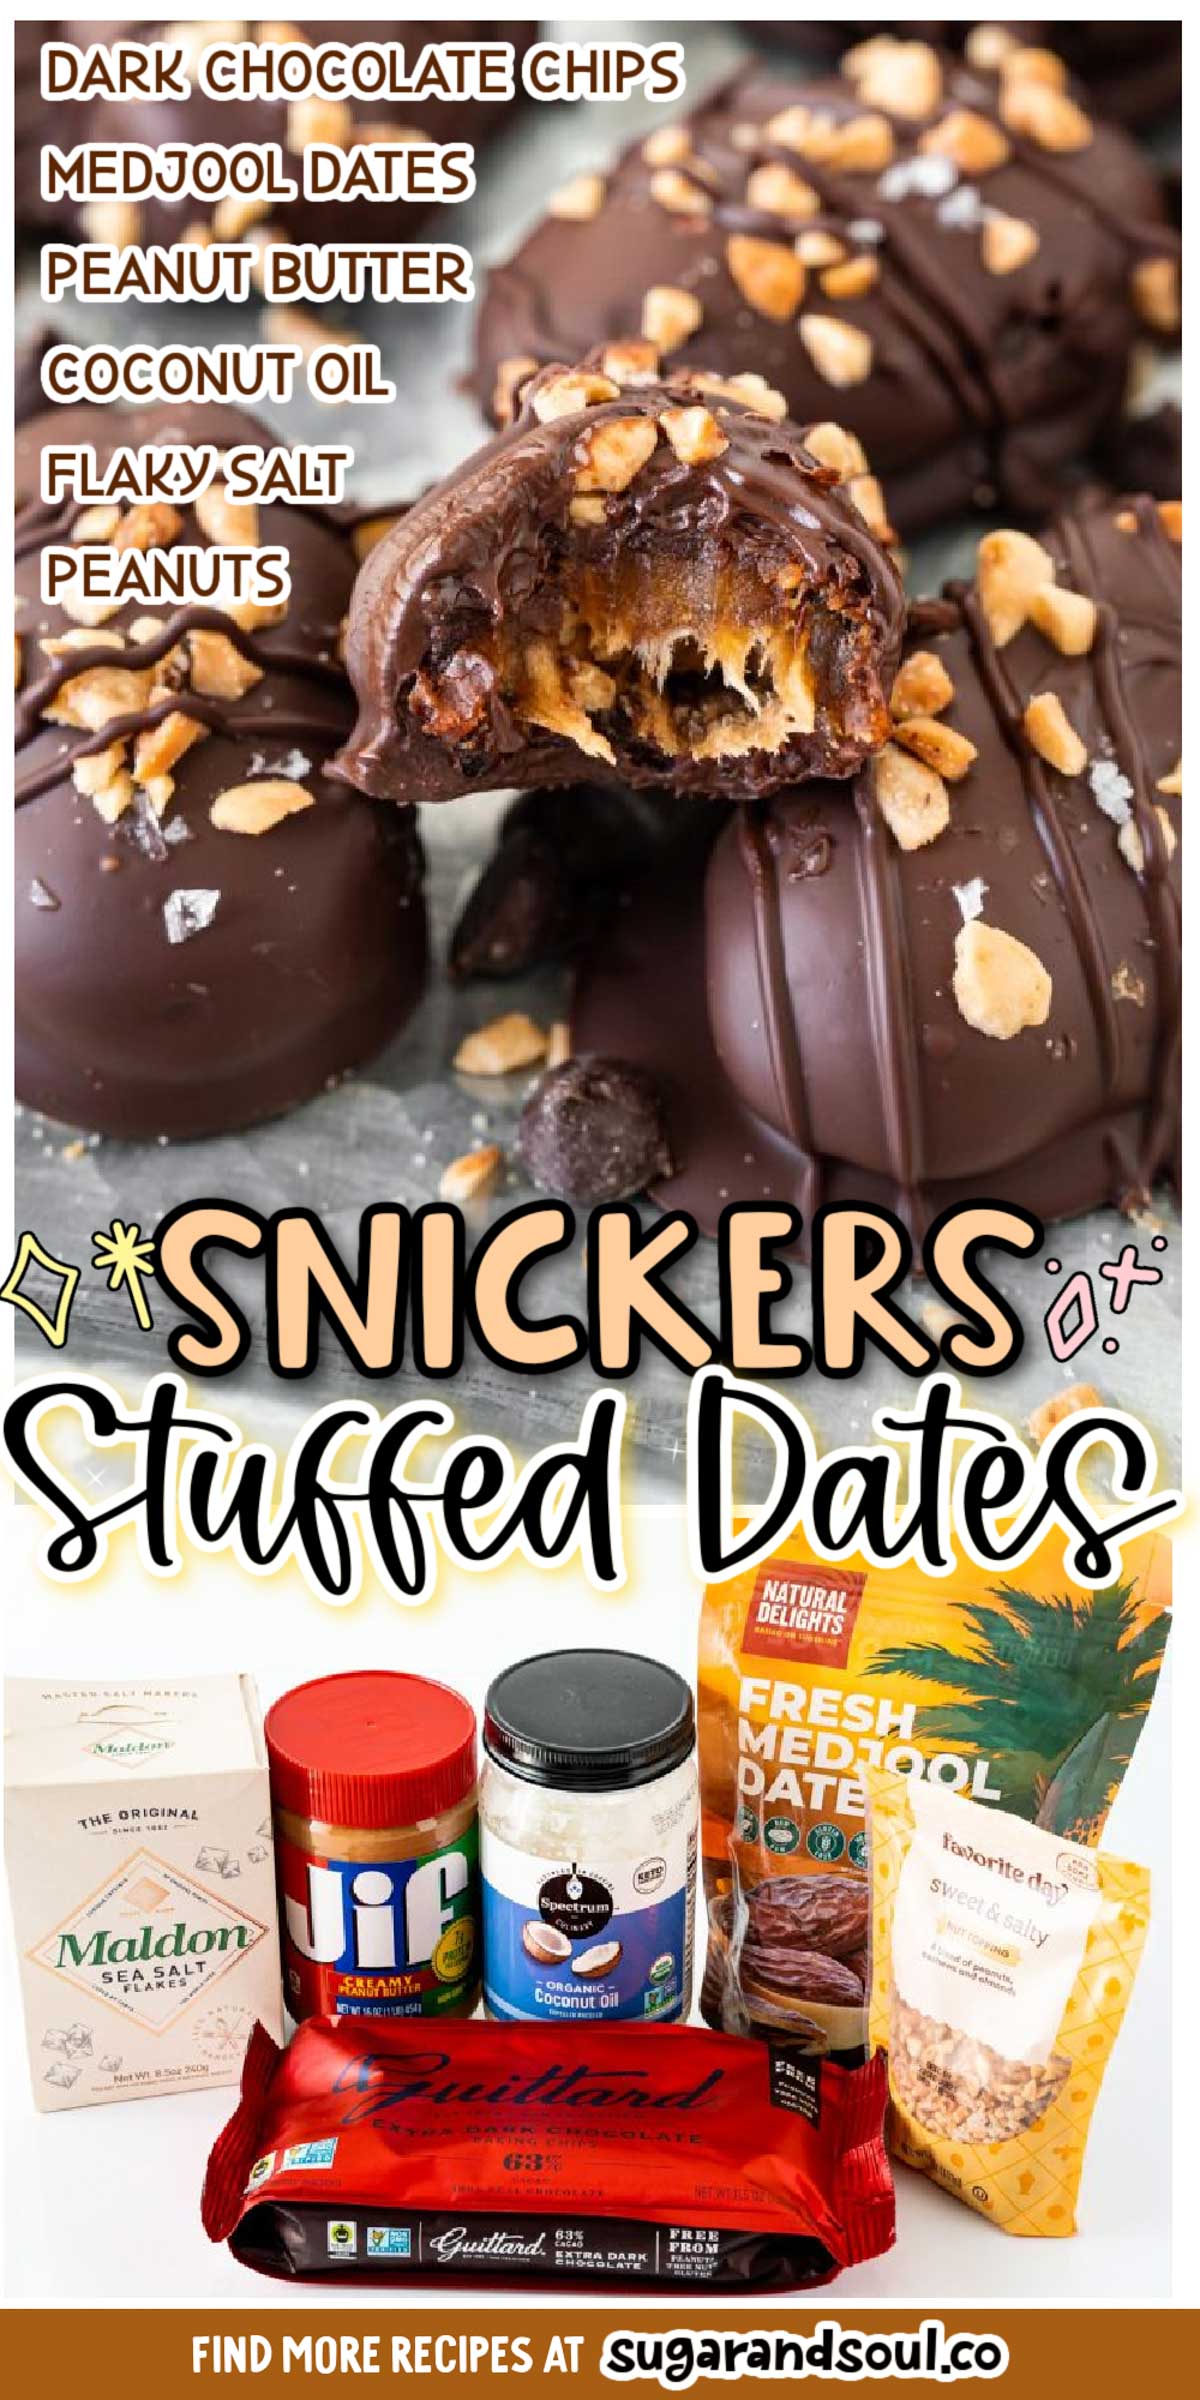 Snickers Stuffed Dates are a fun spin-off from the classic candy bar that's trending on TikTok for being a deliciously sweet yet salty treat! Make a batch in just 30 minutes! via @sugarandsoulco